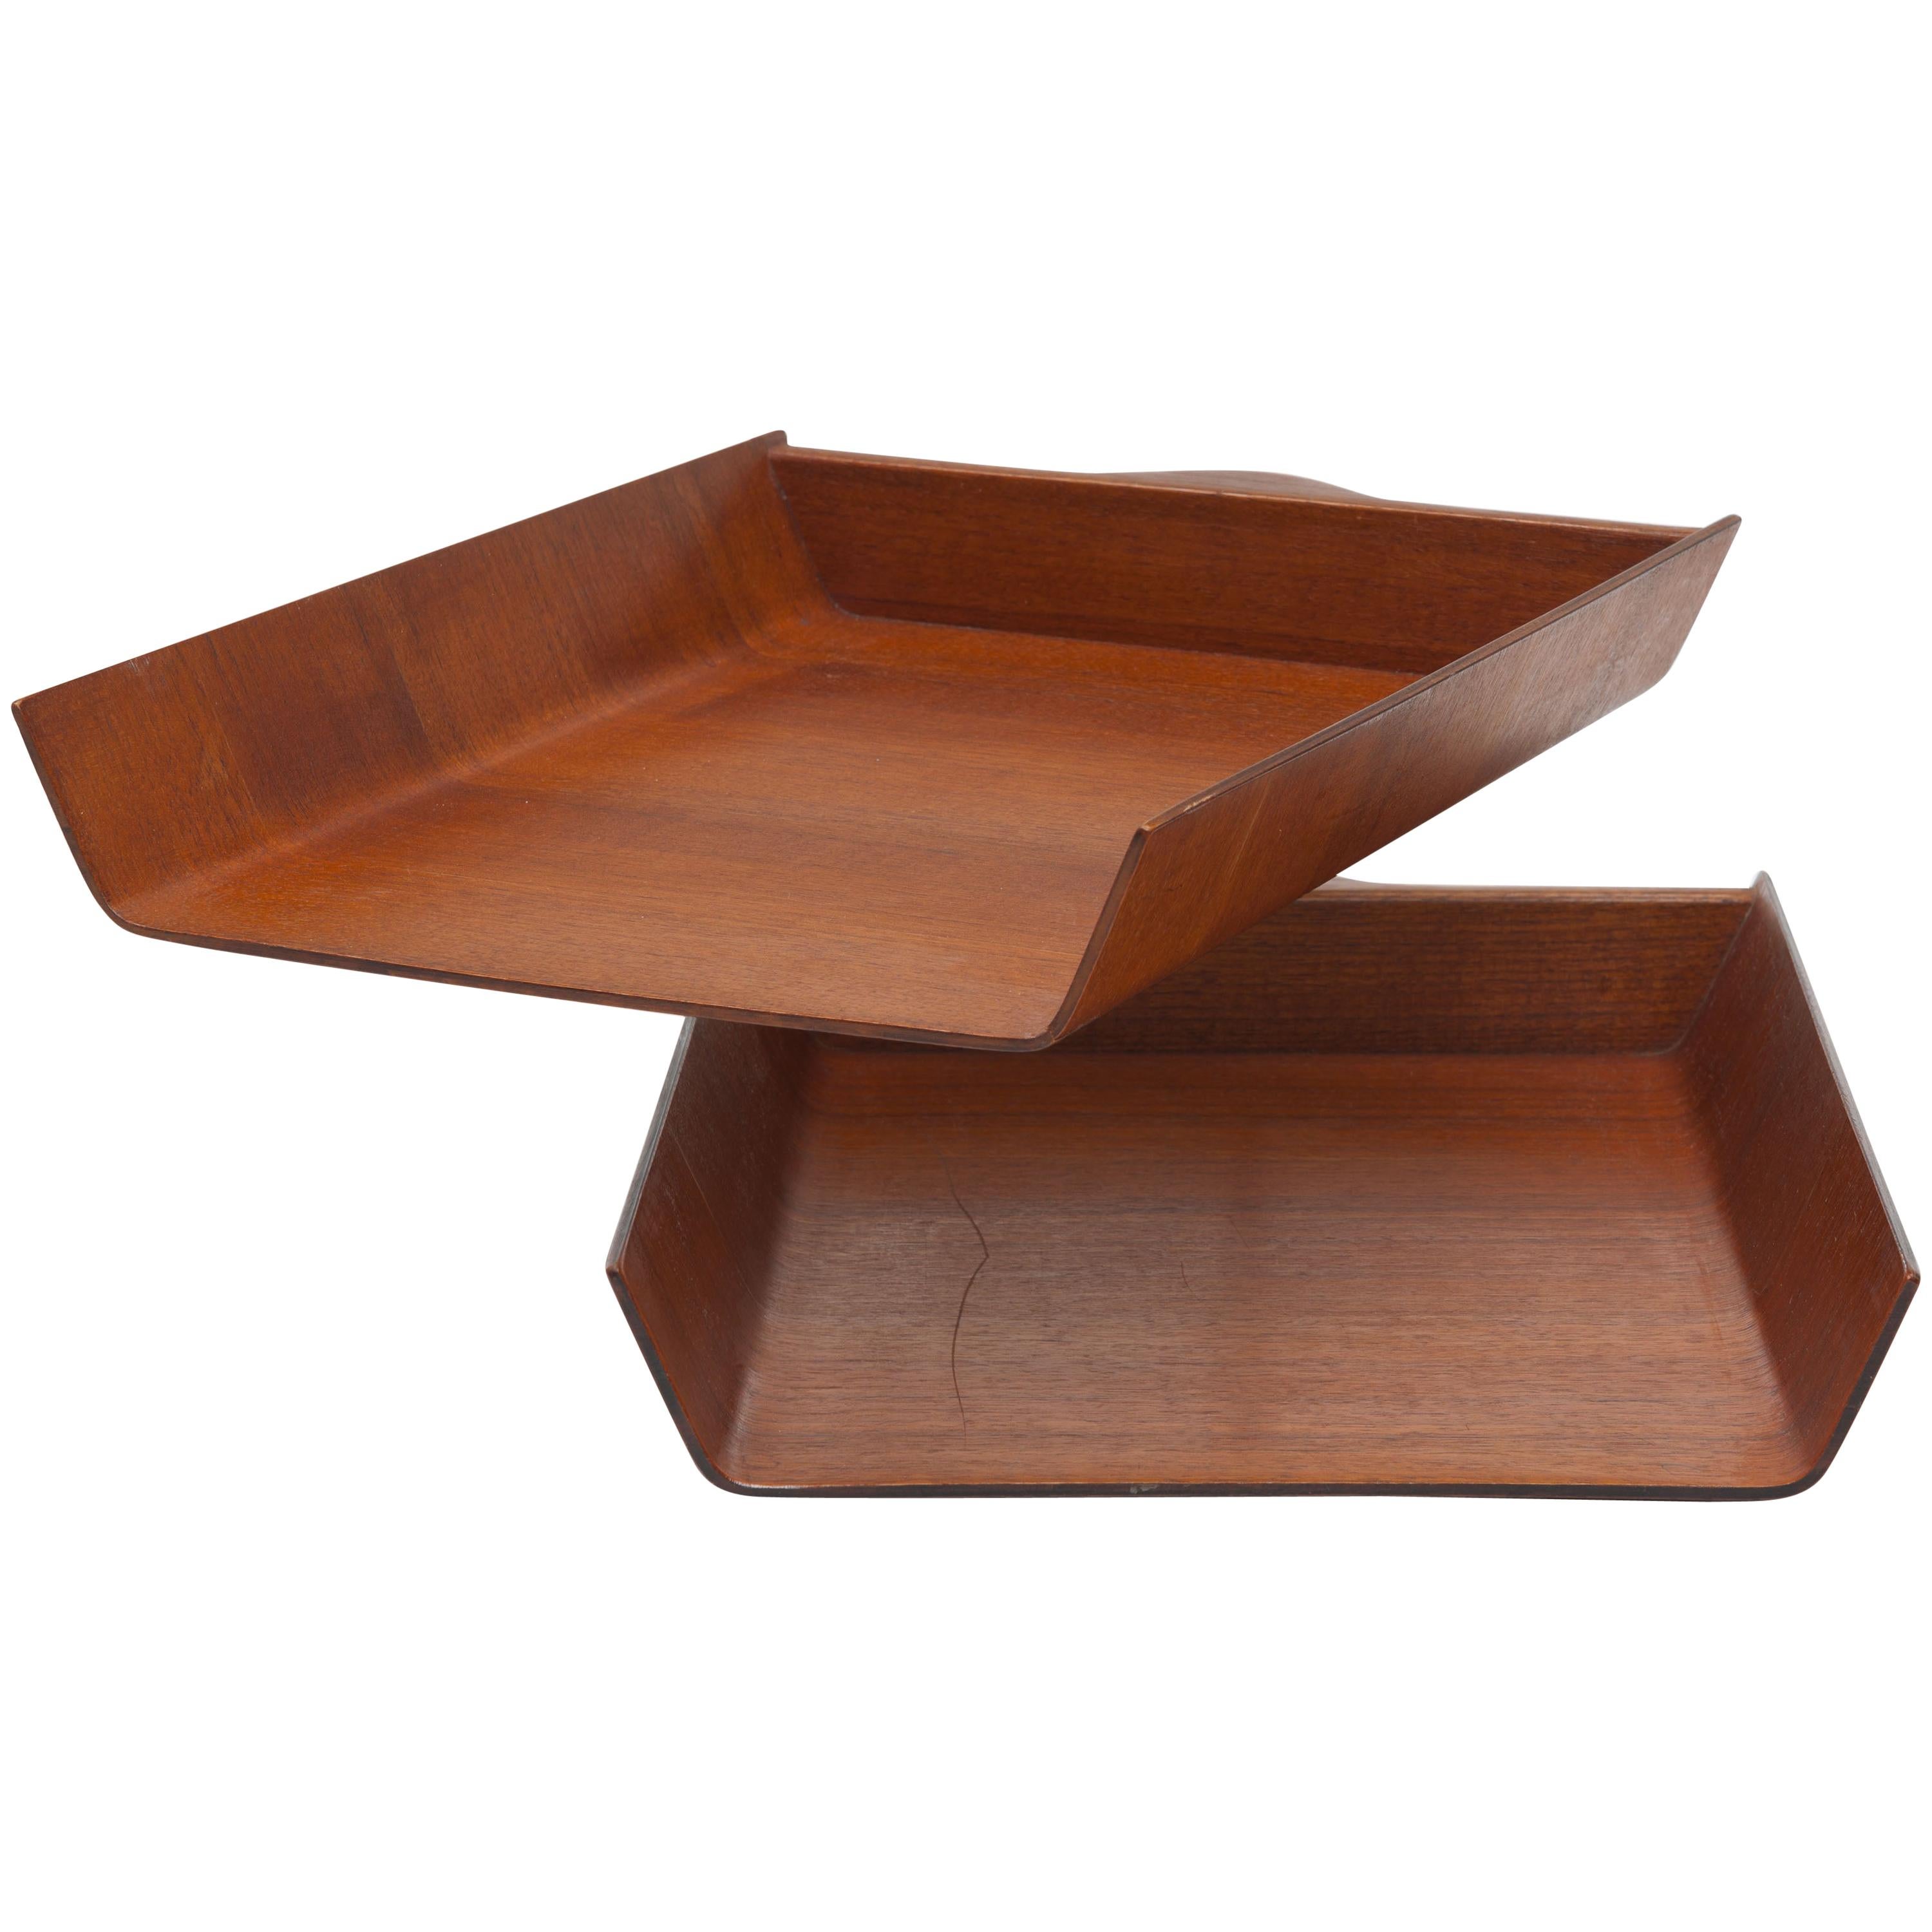 1960s Florence Knoll Pivoting Walnut Plywood Desk Tray by Knoll